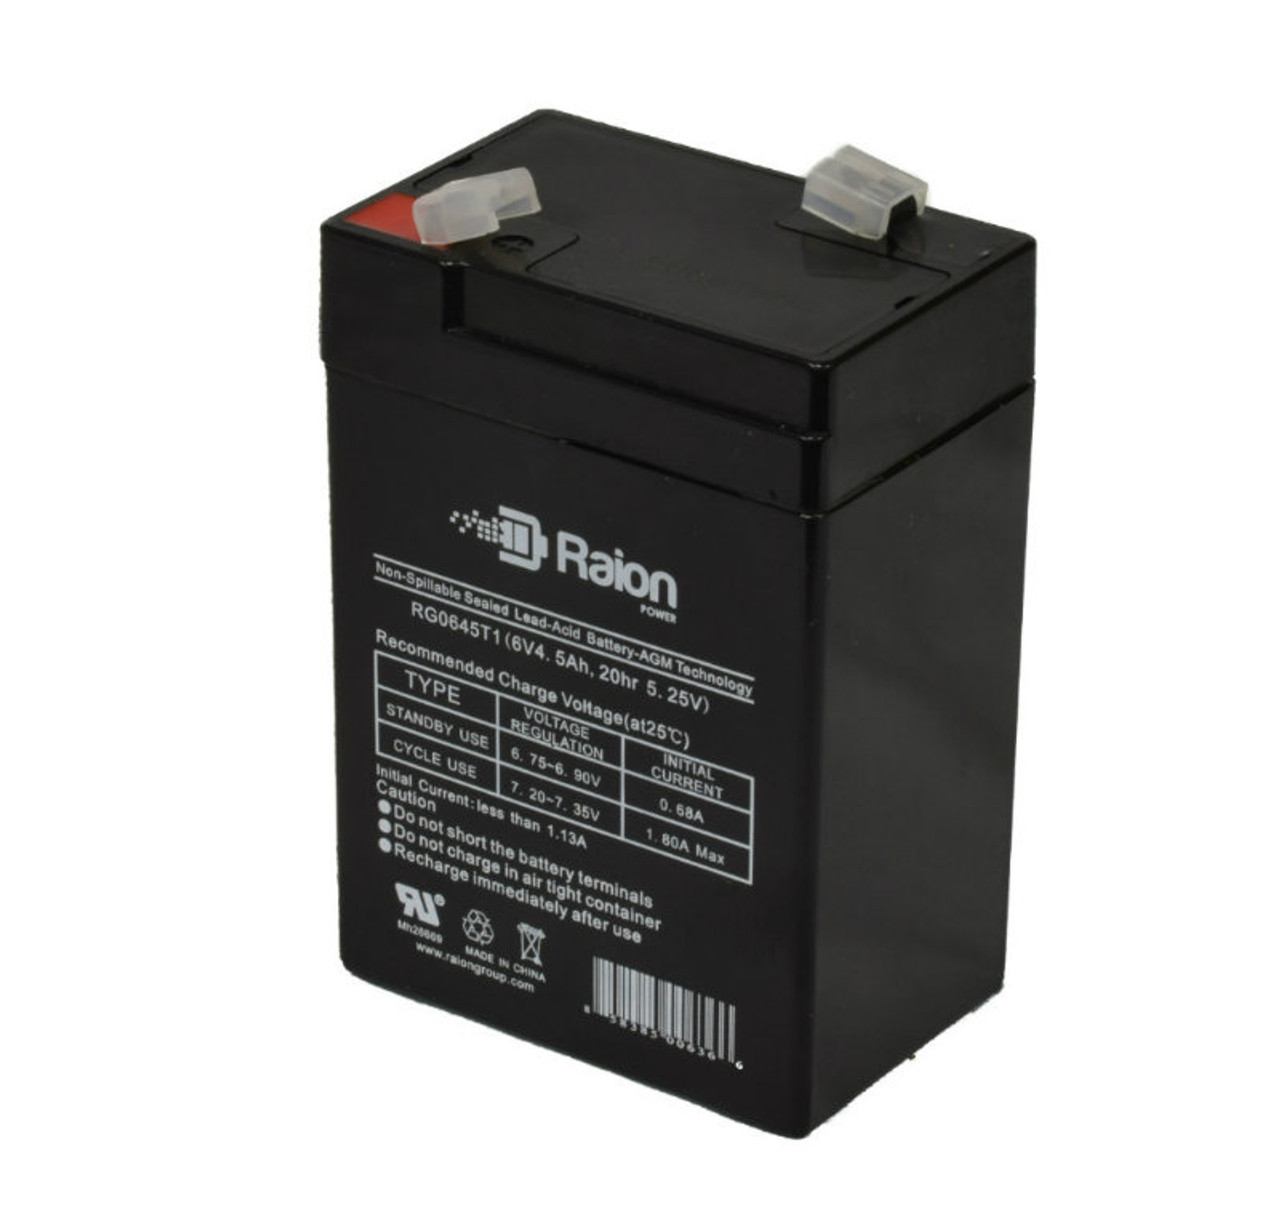 Raion Power RG0645T1 6V 4.5Ah Replacement Battery Cartridge for Duracell DURA6-5F